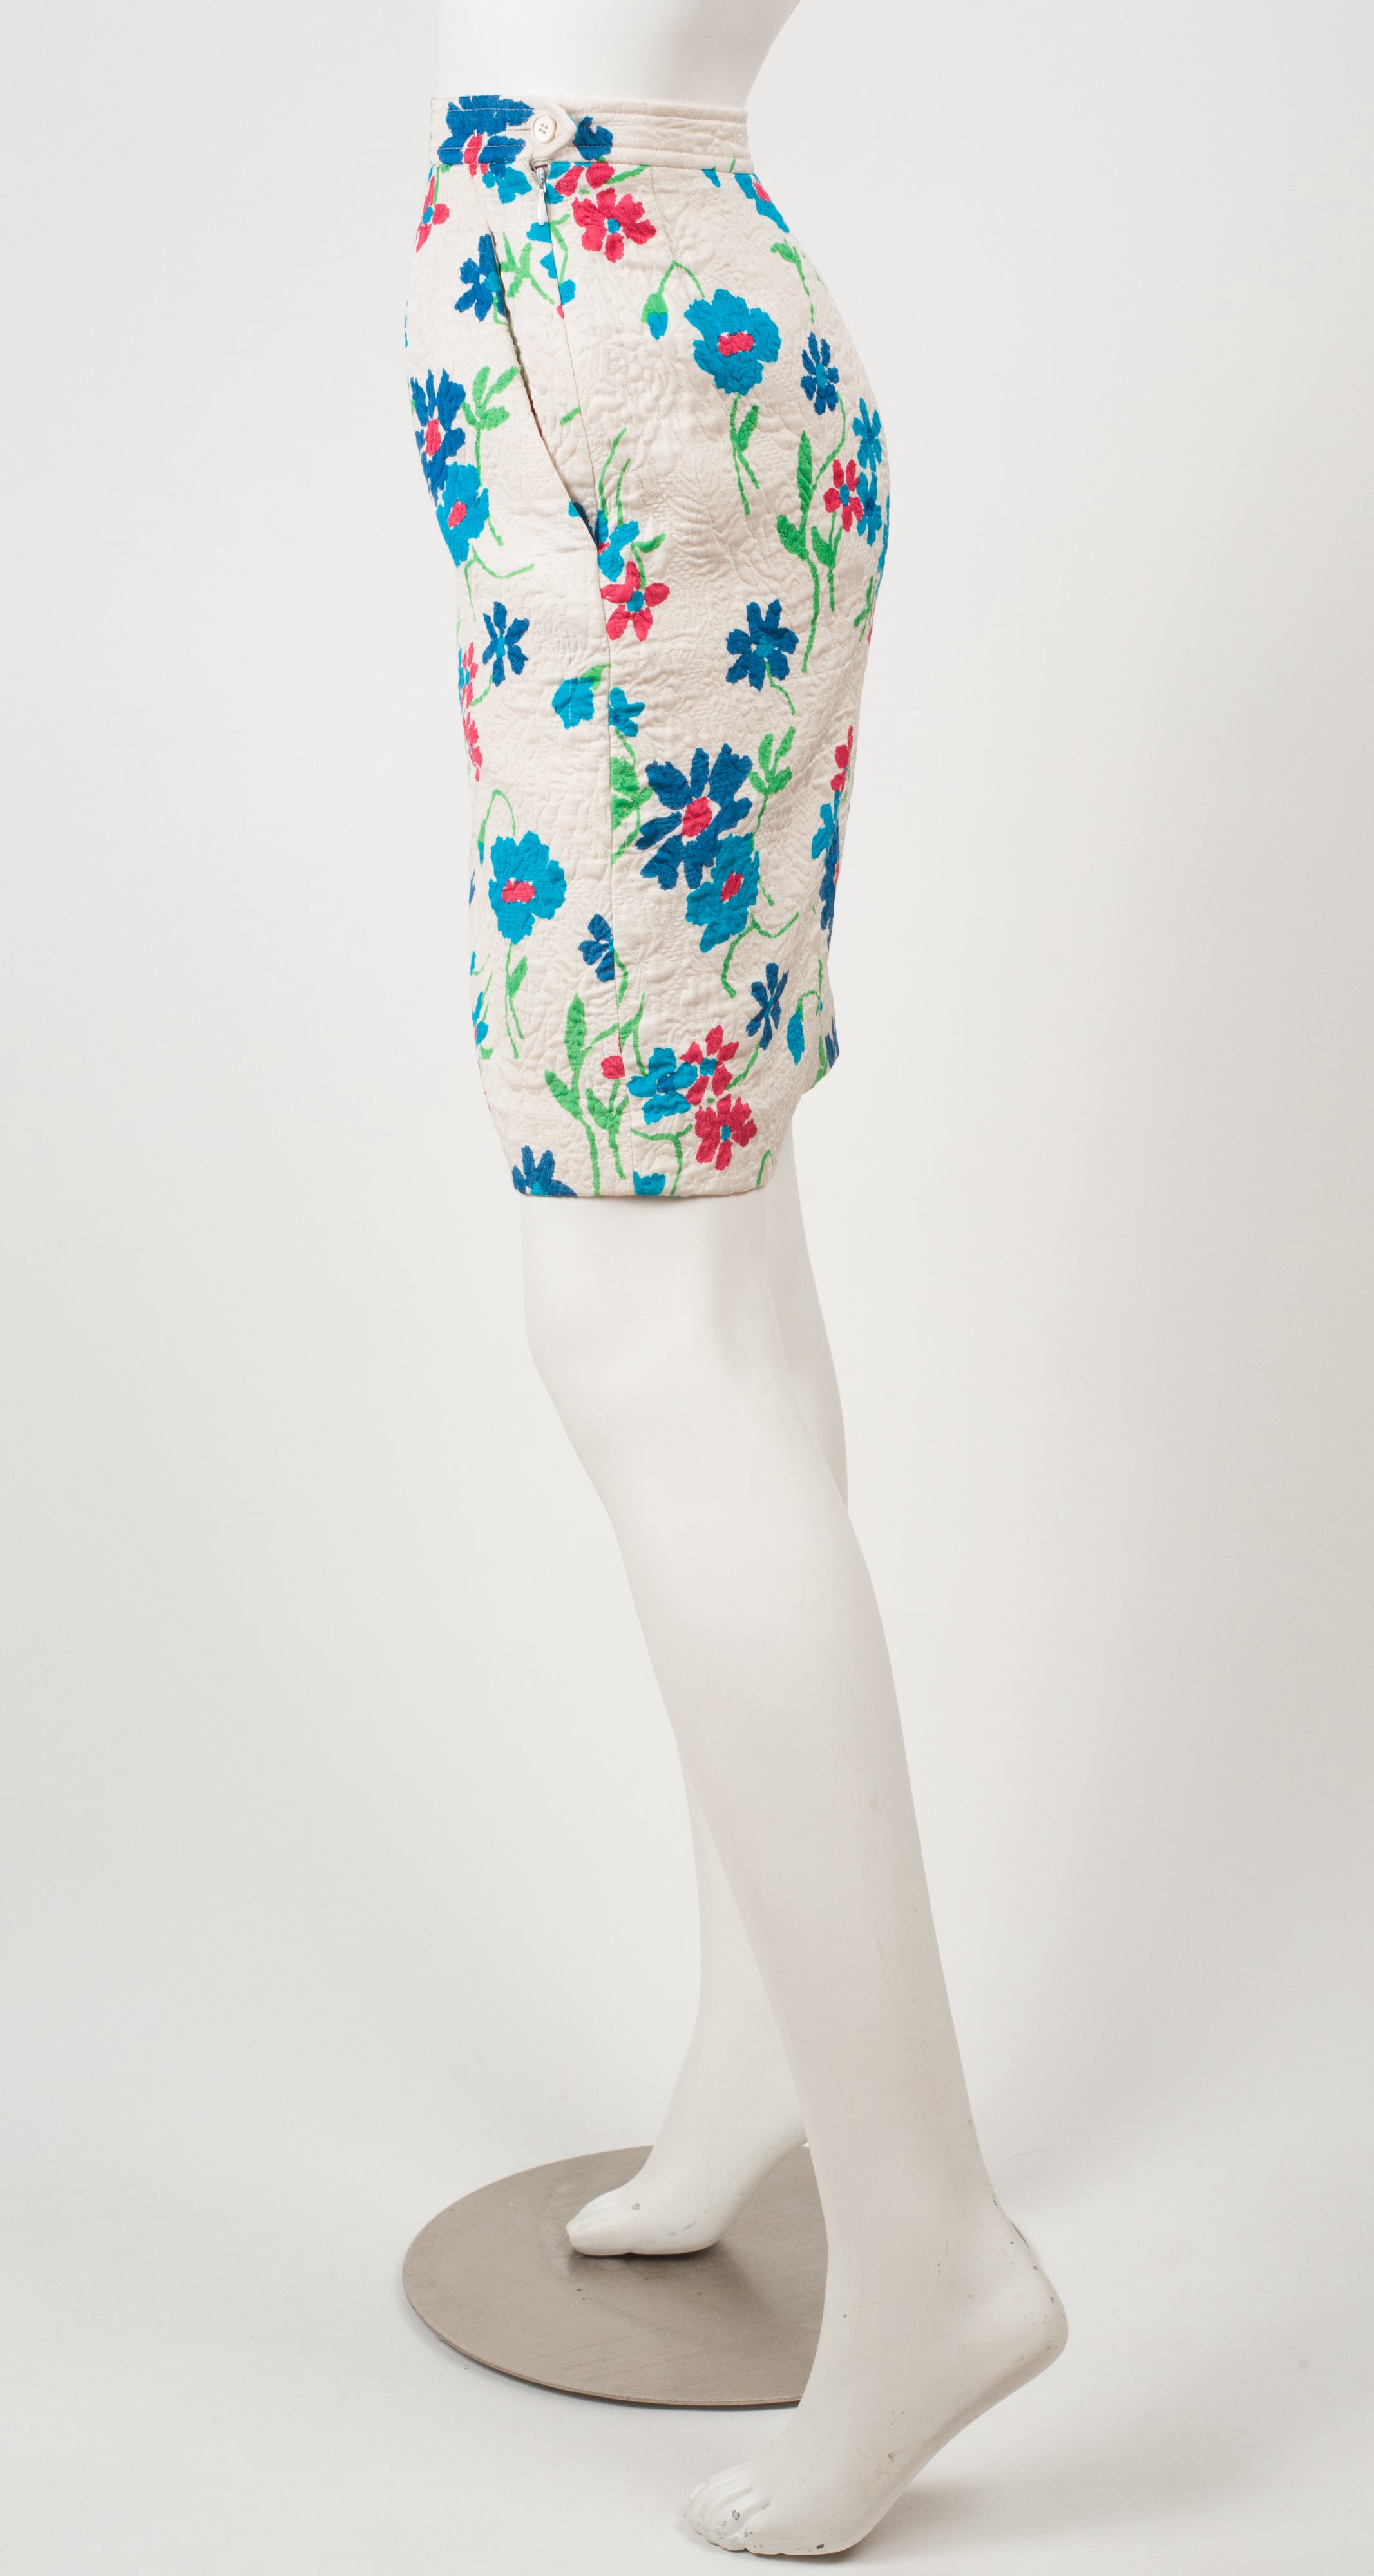 1996 S/S Floral White Quilted Cotton & Wool Pencil Skirt